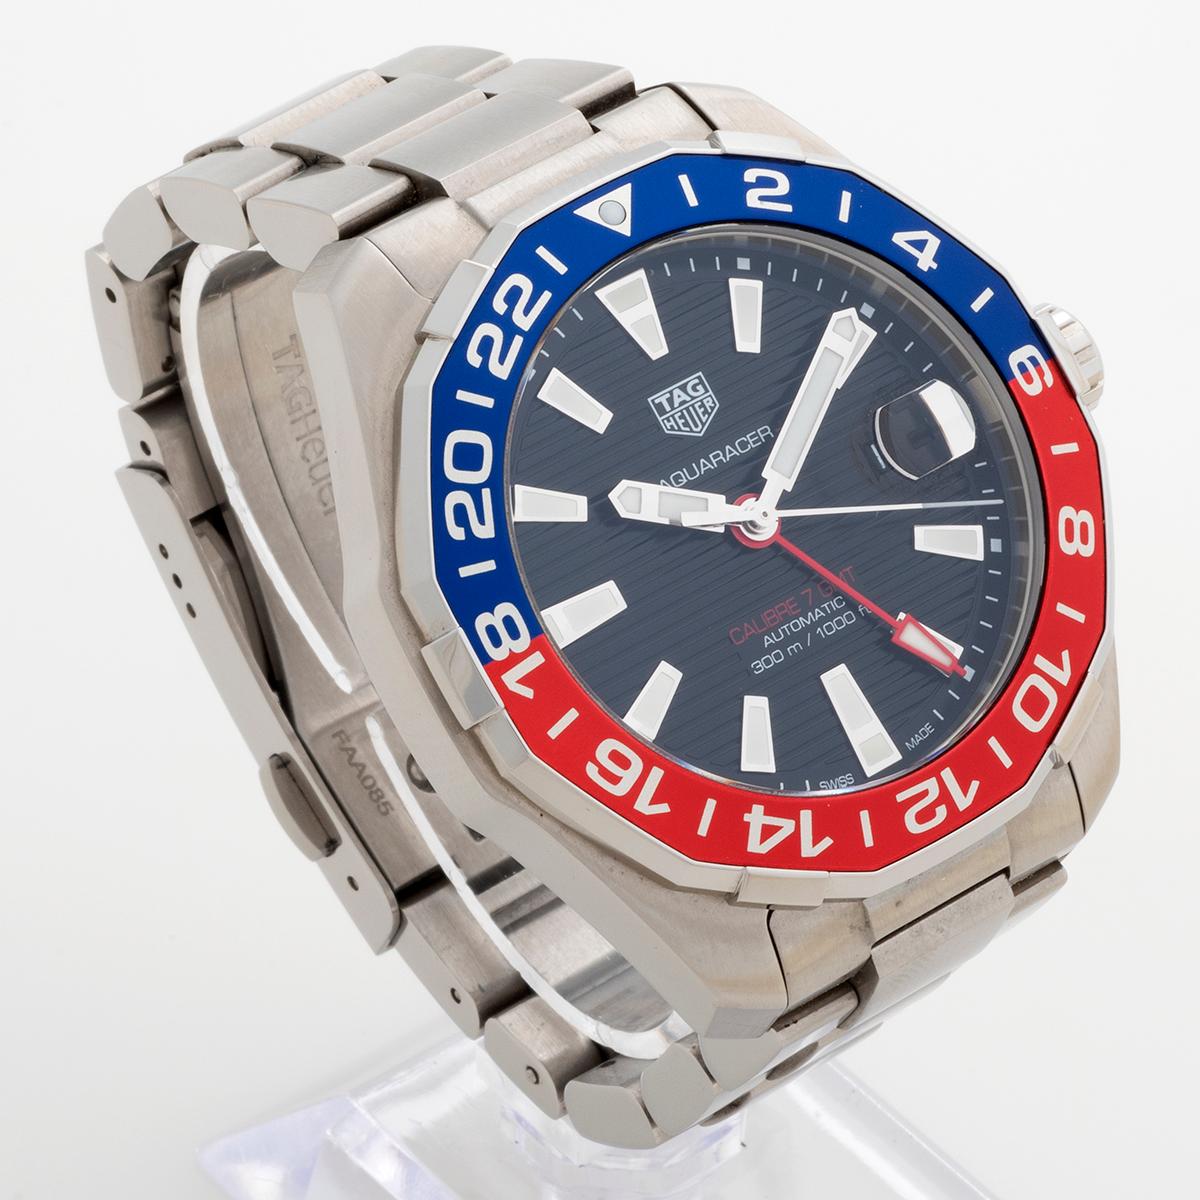 Our Tag Heuer Aquaracer GMT with cal 7 movement, reference WAY201F features a blue/ red bezel 